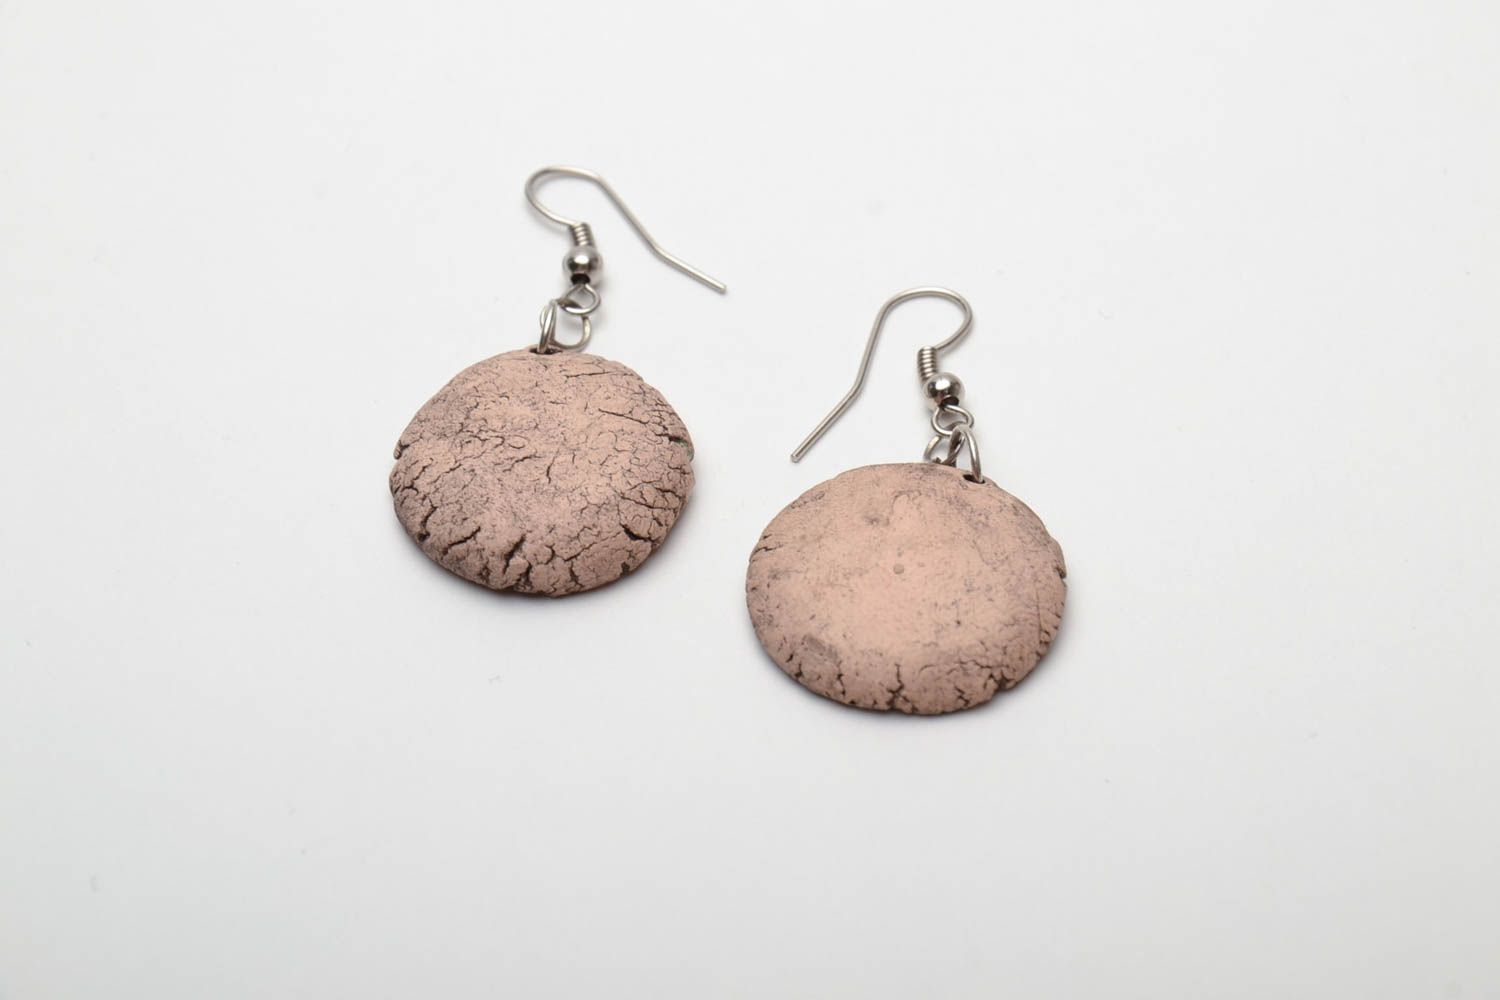 Ceramic earrings with fusing insert photo 4